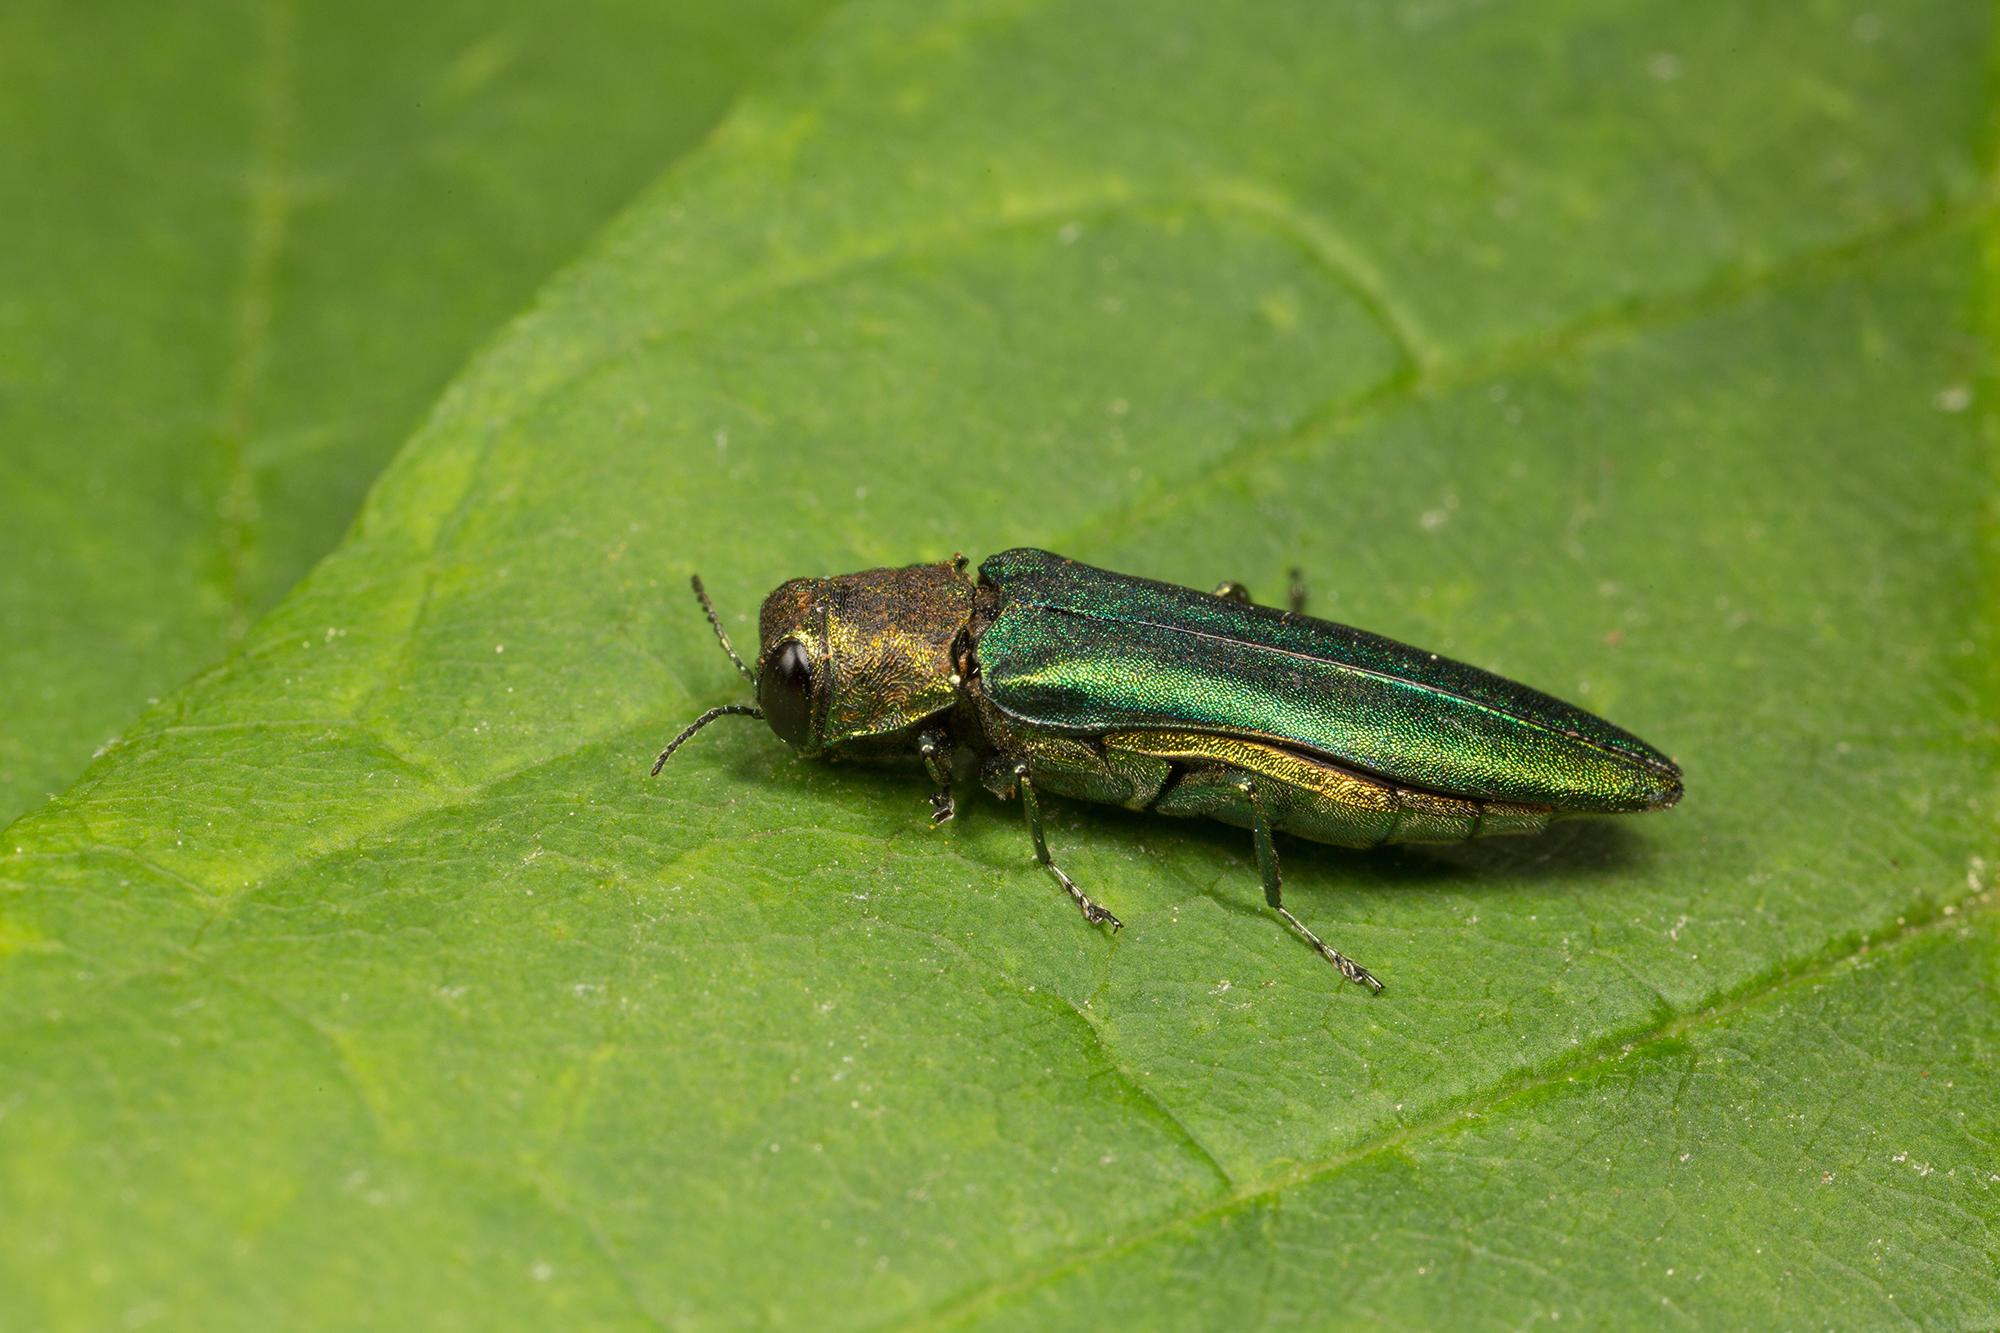 Emerald Ash Borer on a leaf. The insect is a metallic green shade.